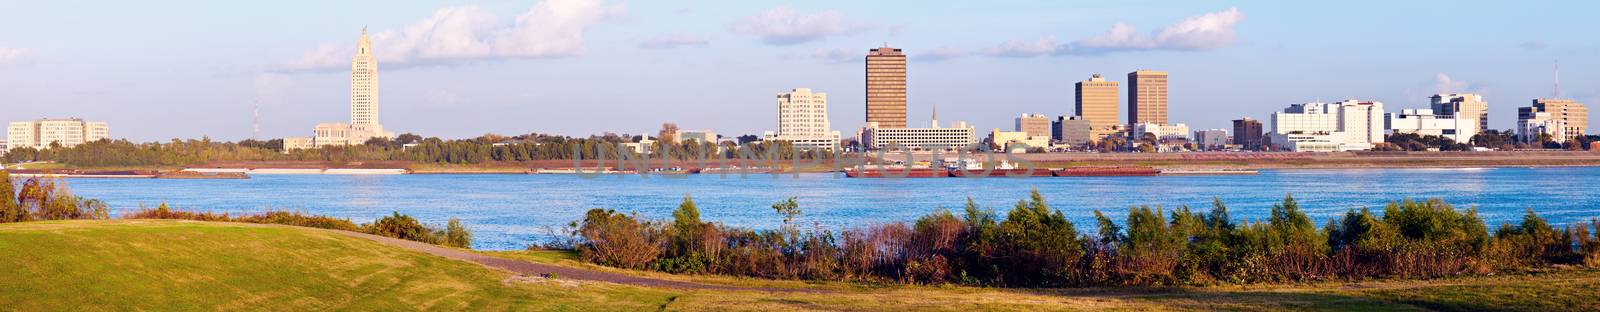 Panoramic Baton Rouge - seen late afternoon